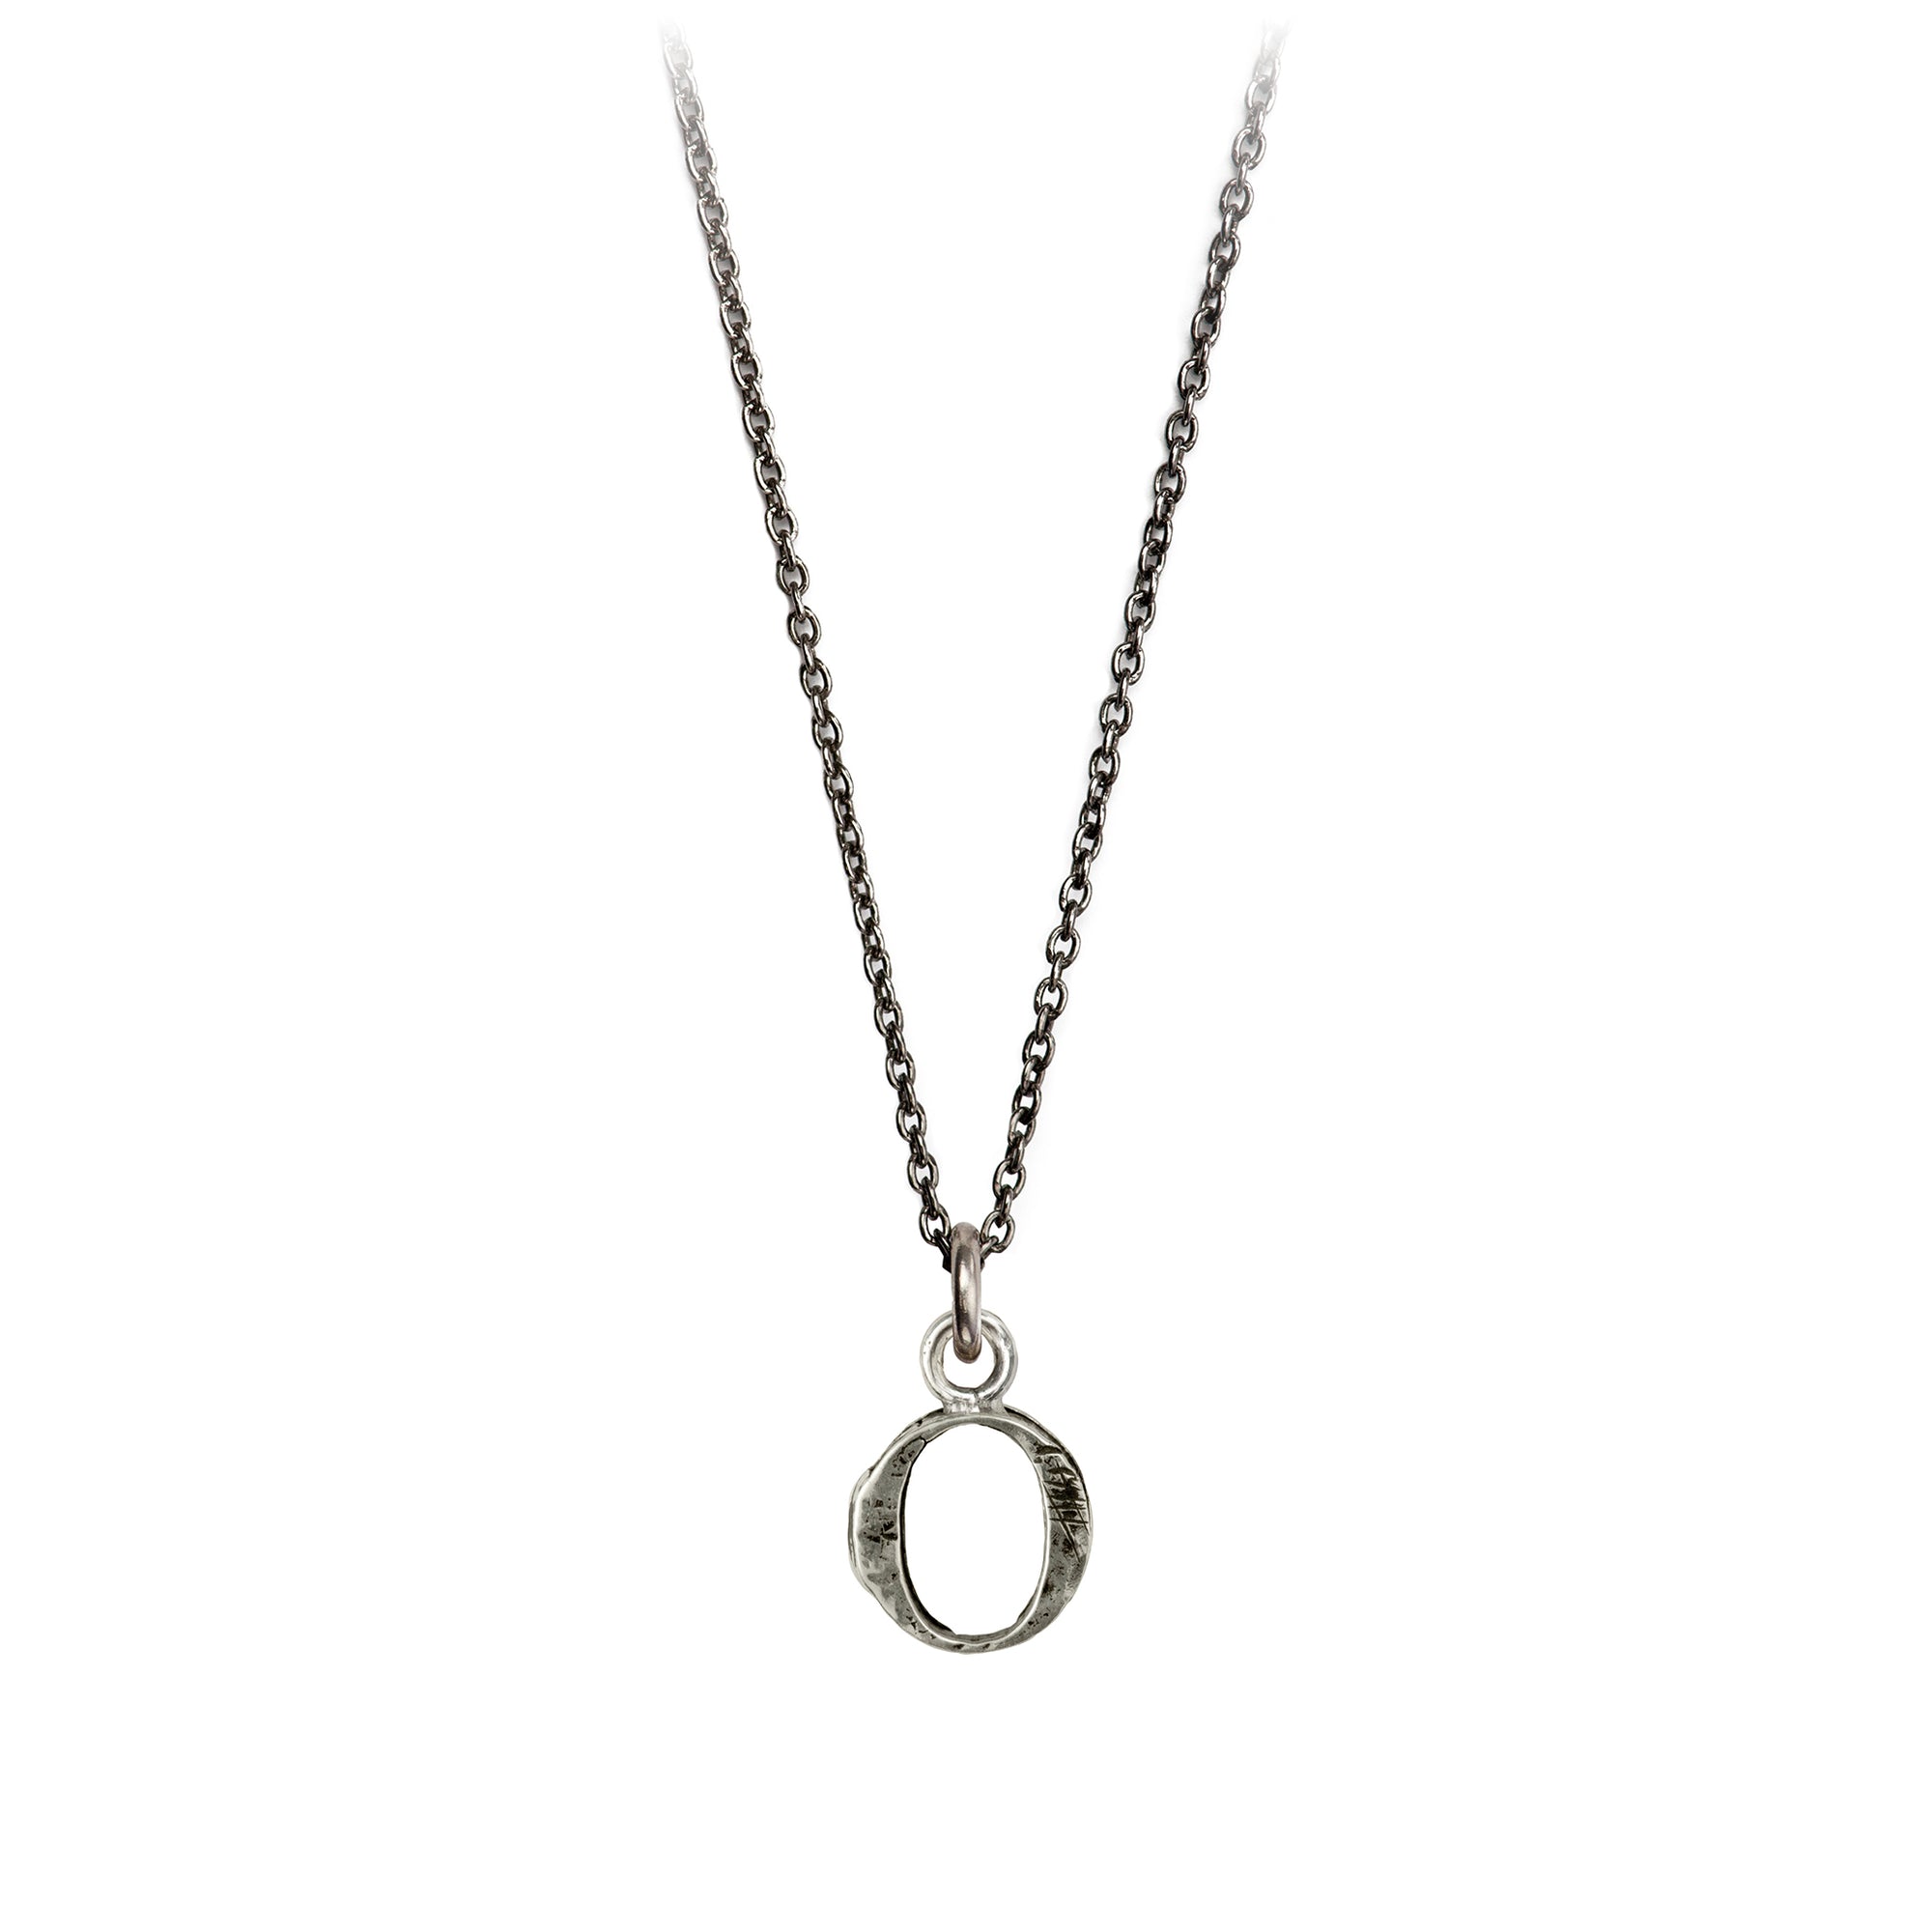 A sterling silver letter "O" charm on a silver chain.